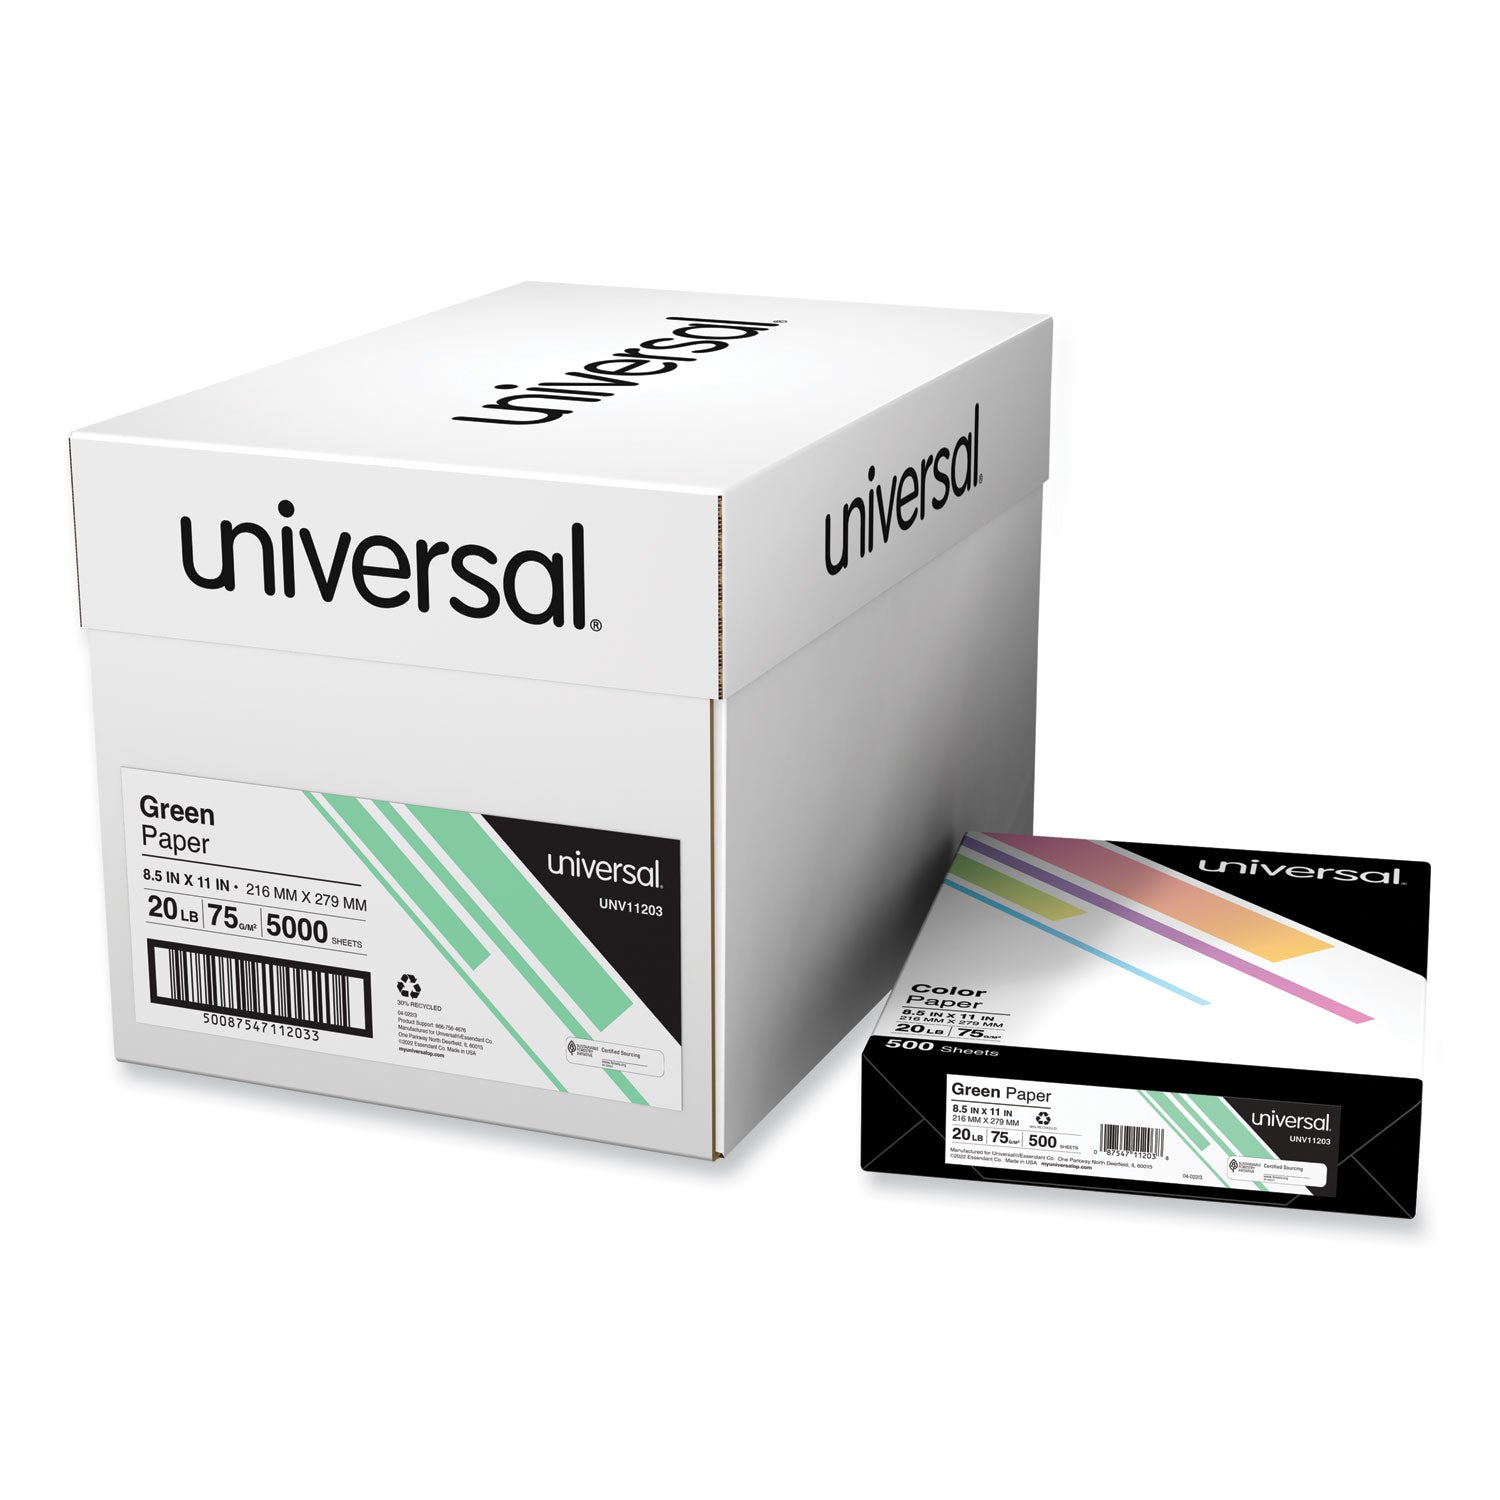 deluxe-colored-paper-20-lb-bond-weight-85-x-11-green-500-sheets-ream-10-reams-carton_unv11203ct - 1